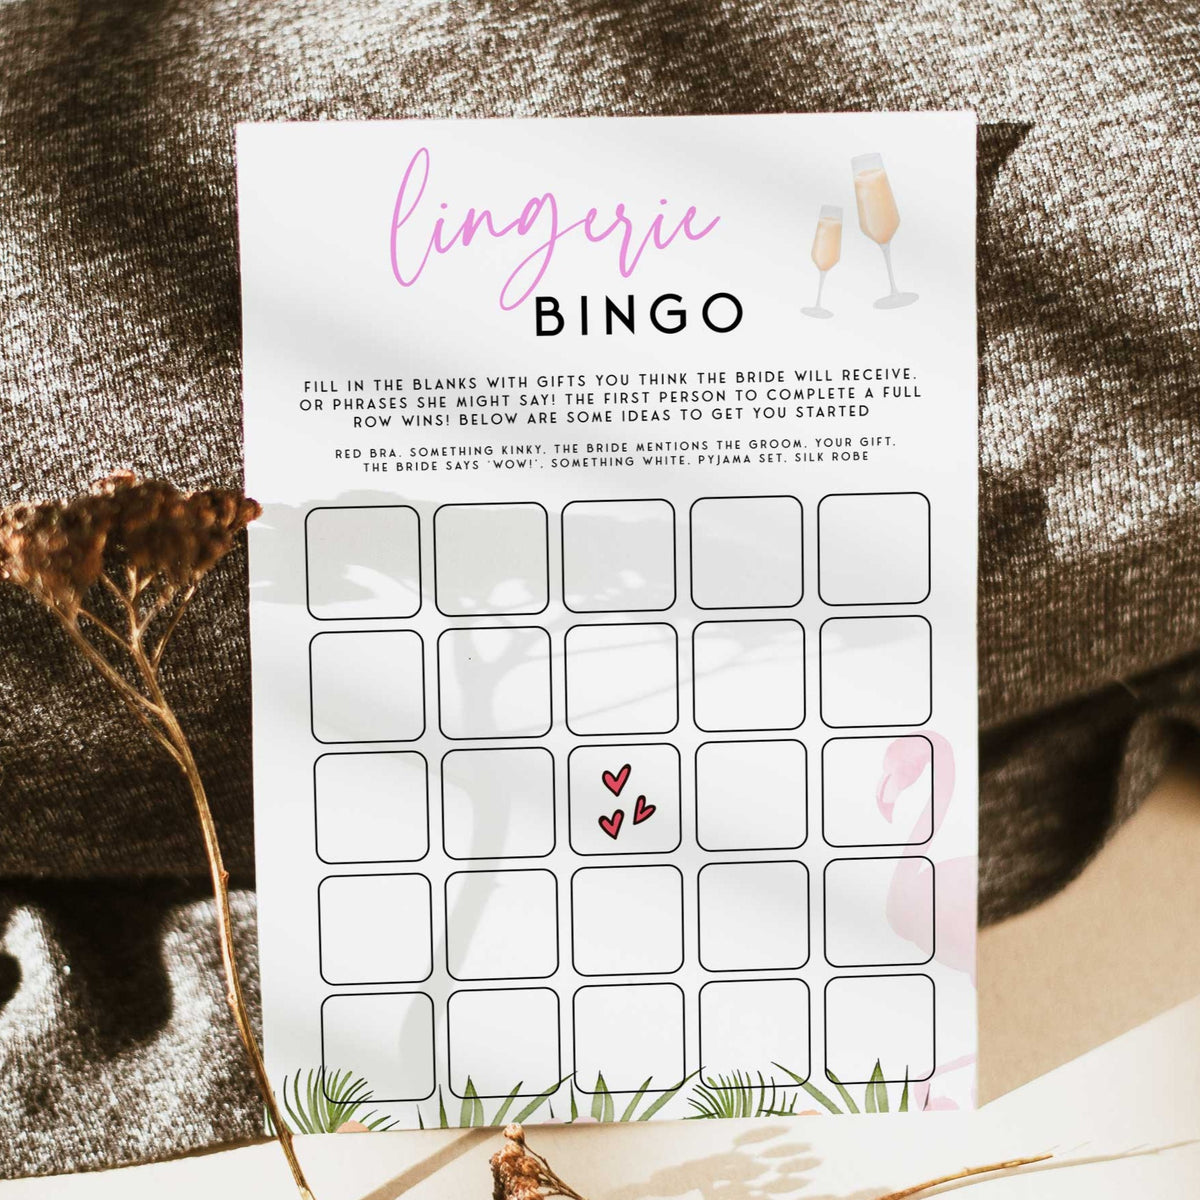 Fully editable and printable lingerie bingo game with a miami design. Perfect for a miami, Bachelorette themed party